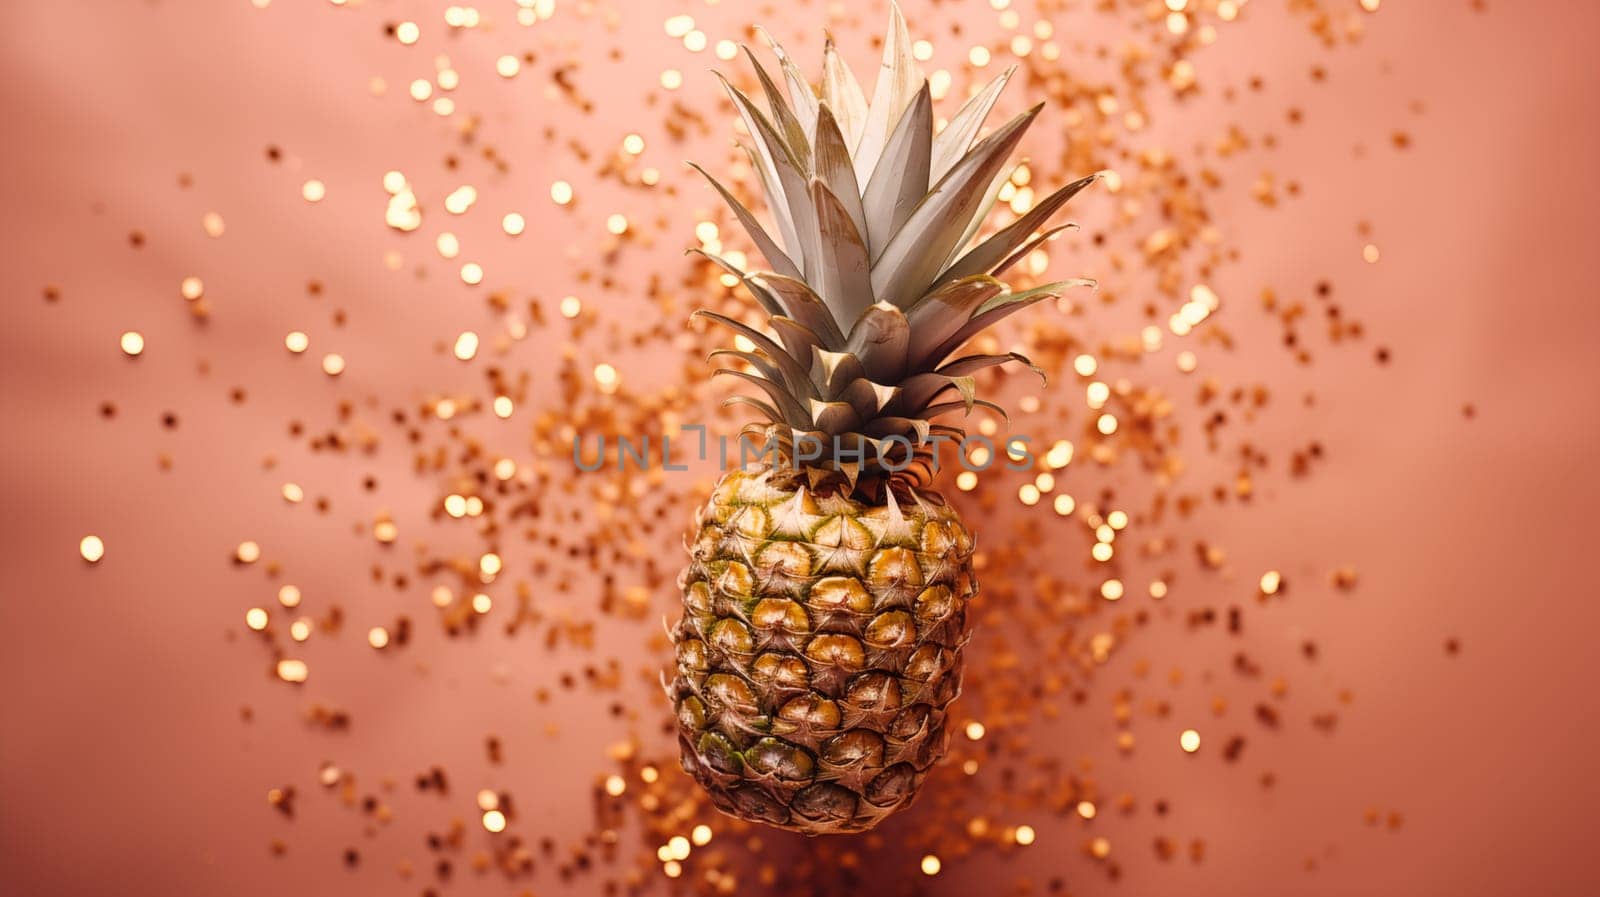 Pineapple is lying on a peach-colored background with golden confetti is scattered nearby.